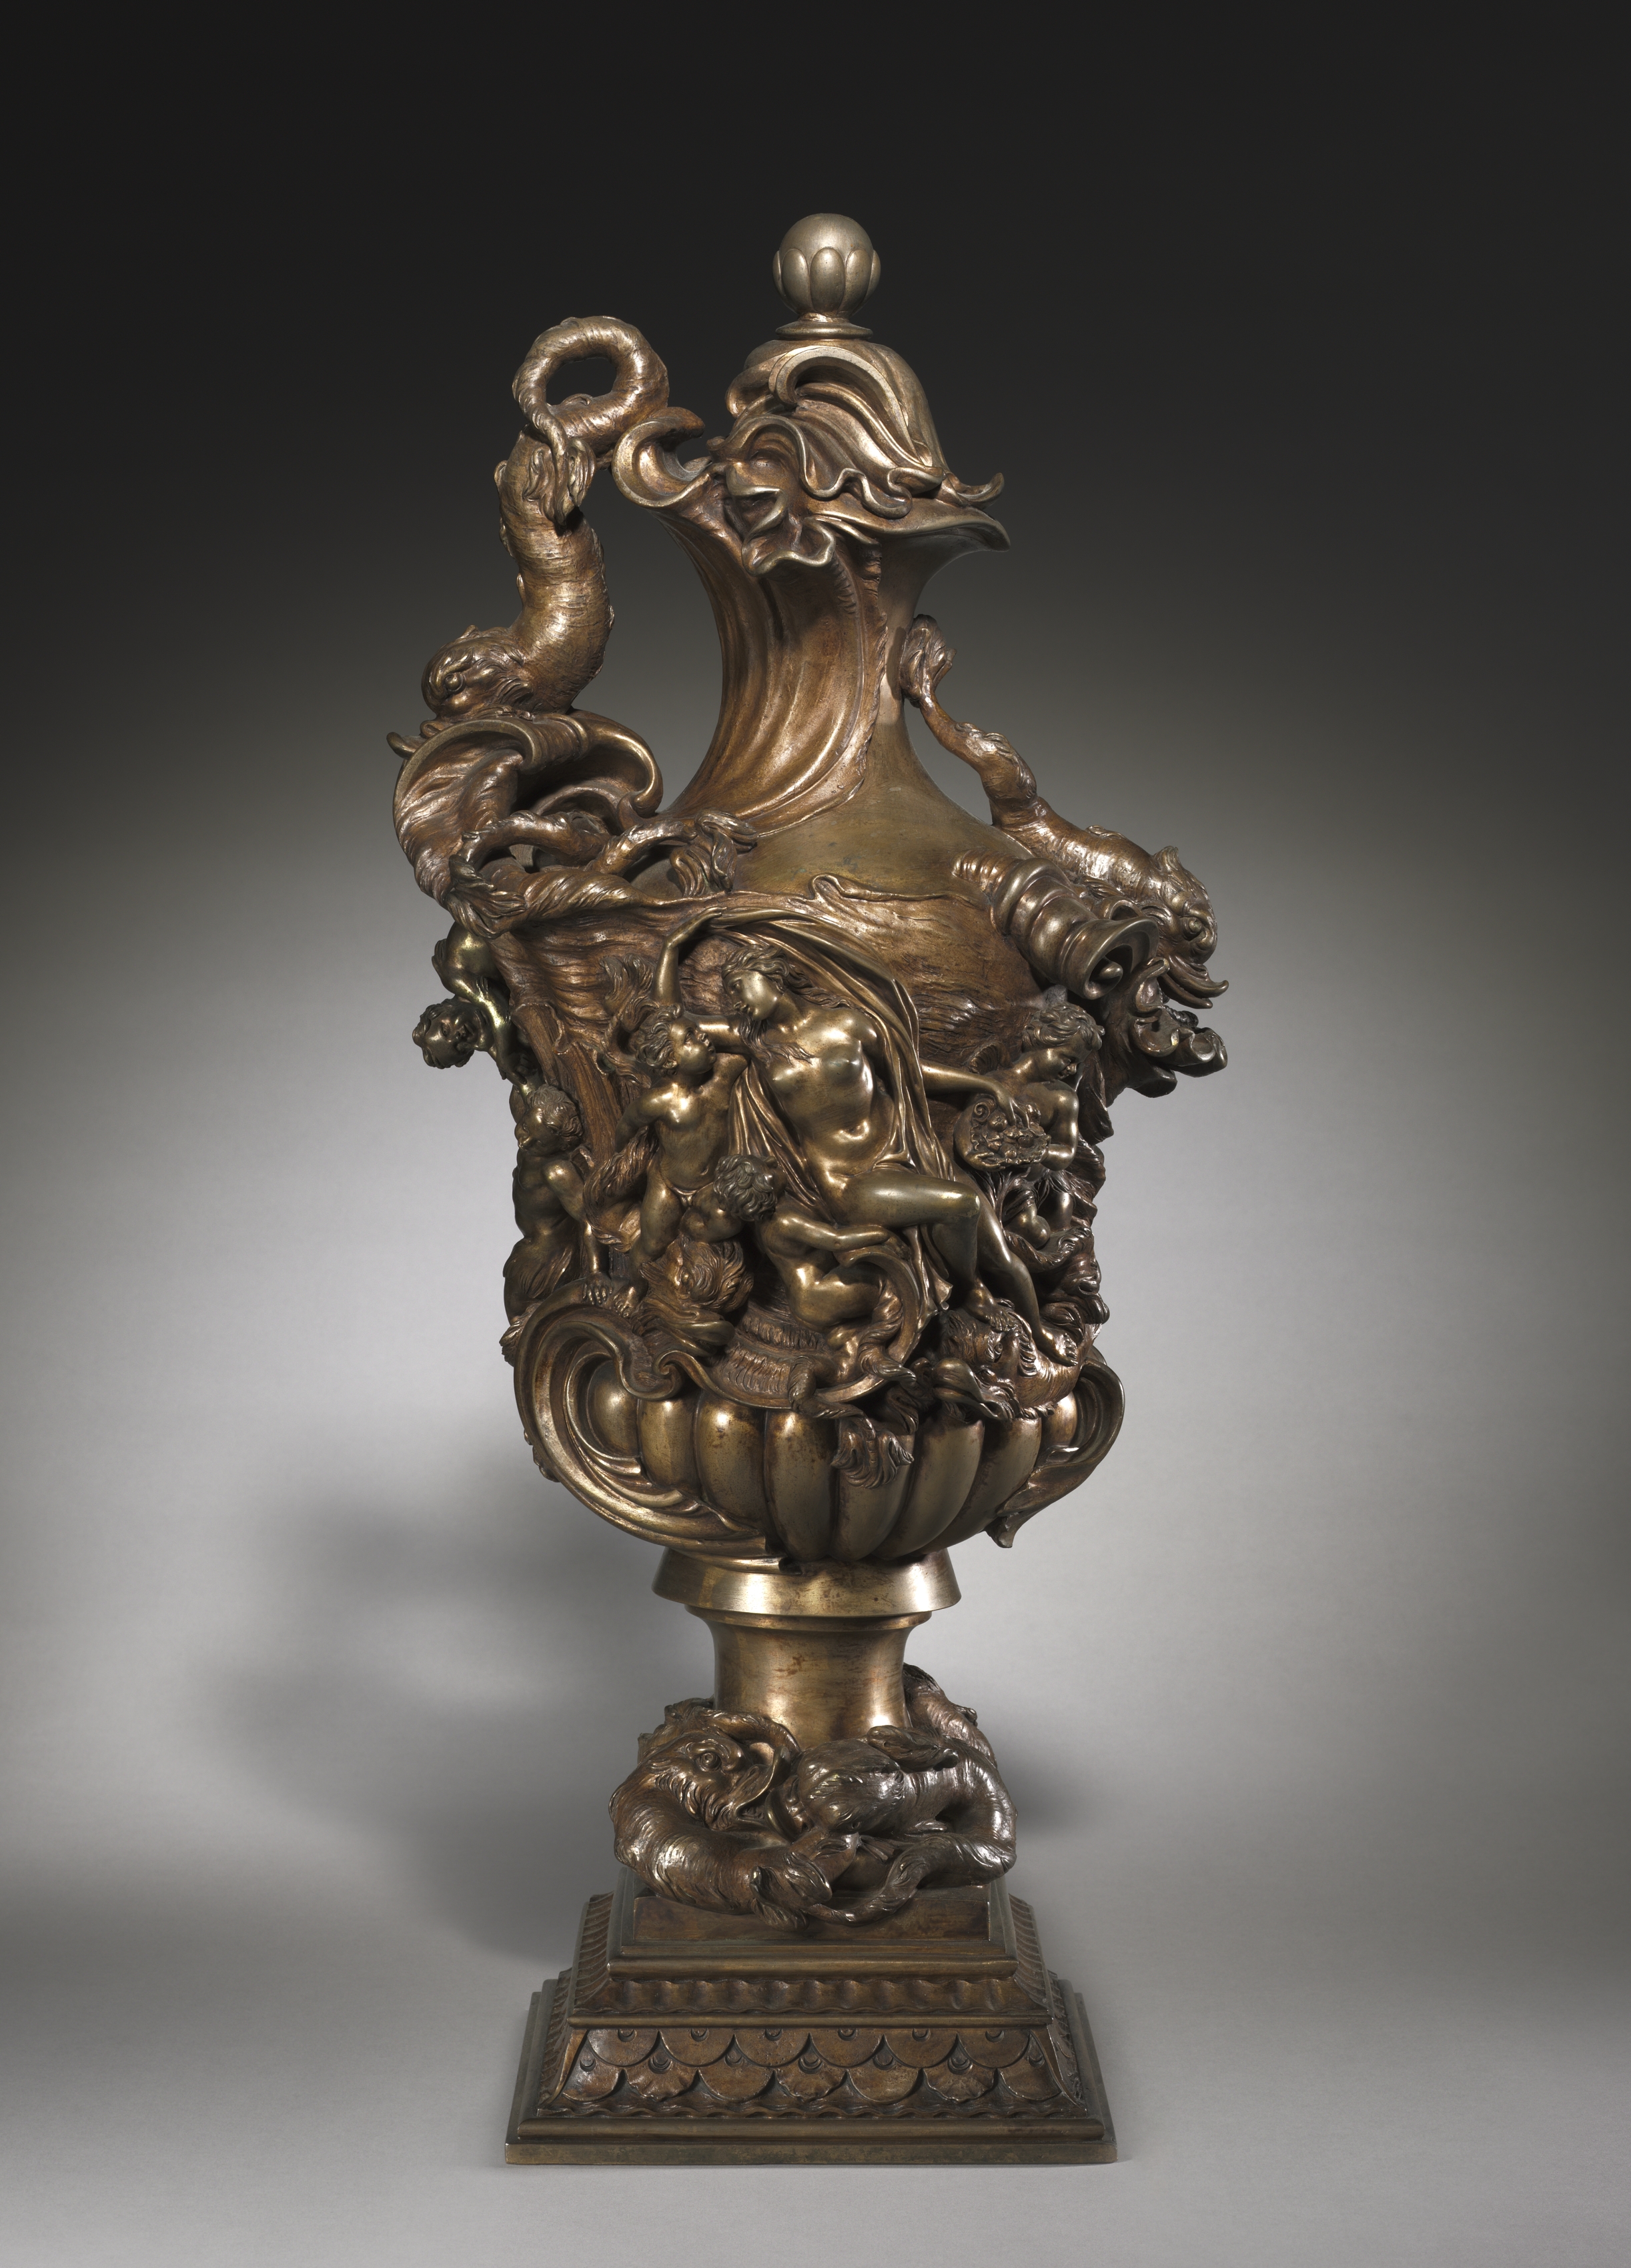 Ewer with Triumph of Galatea